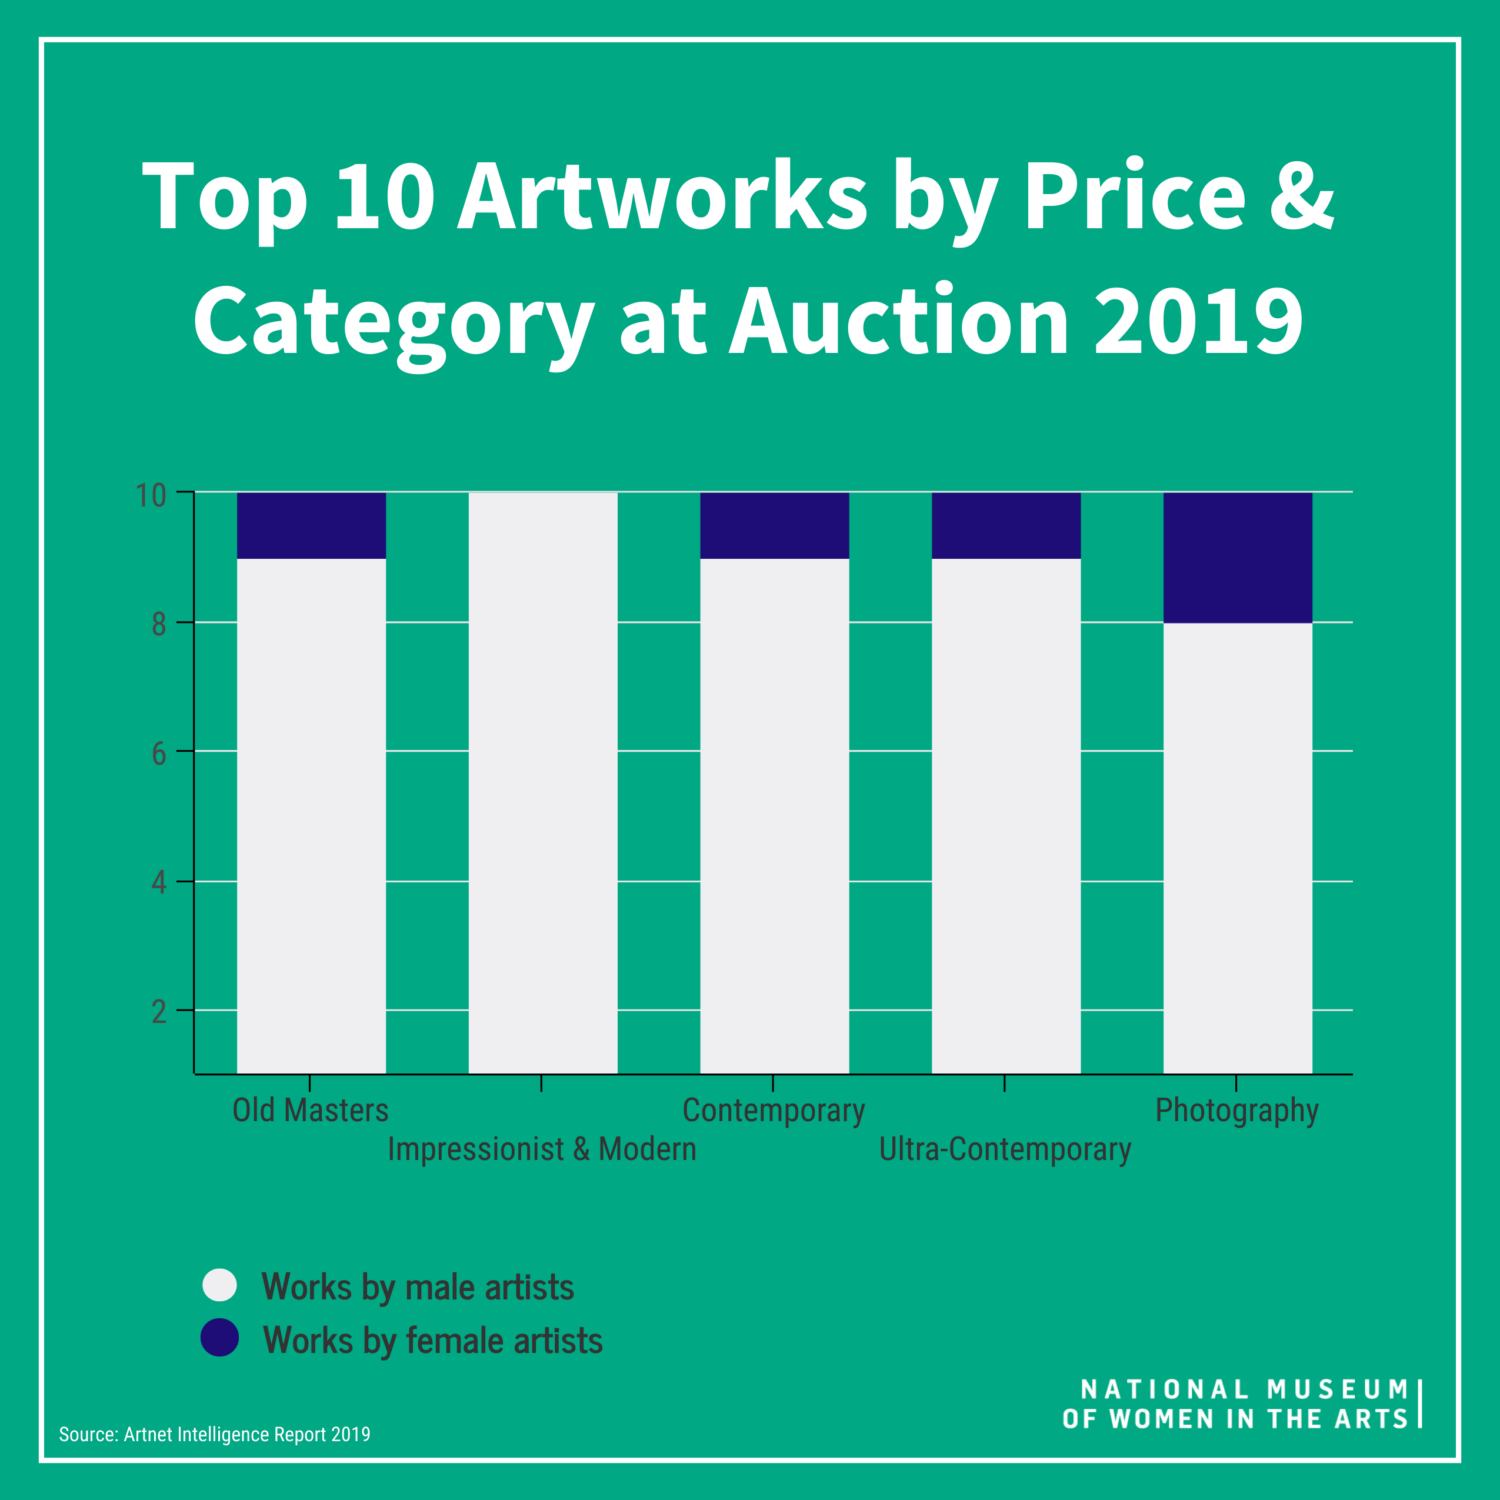 A bar graph showing the Top 10 Artworks by Price & Category at Auction 2019. The vast majority of artworks in all categories are by male artists, not female artists. At the bottom of the graphic is the National Museum of Women in the Arts logo and the text 'Source: Artnet Intelligence Report 2019.'